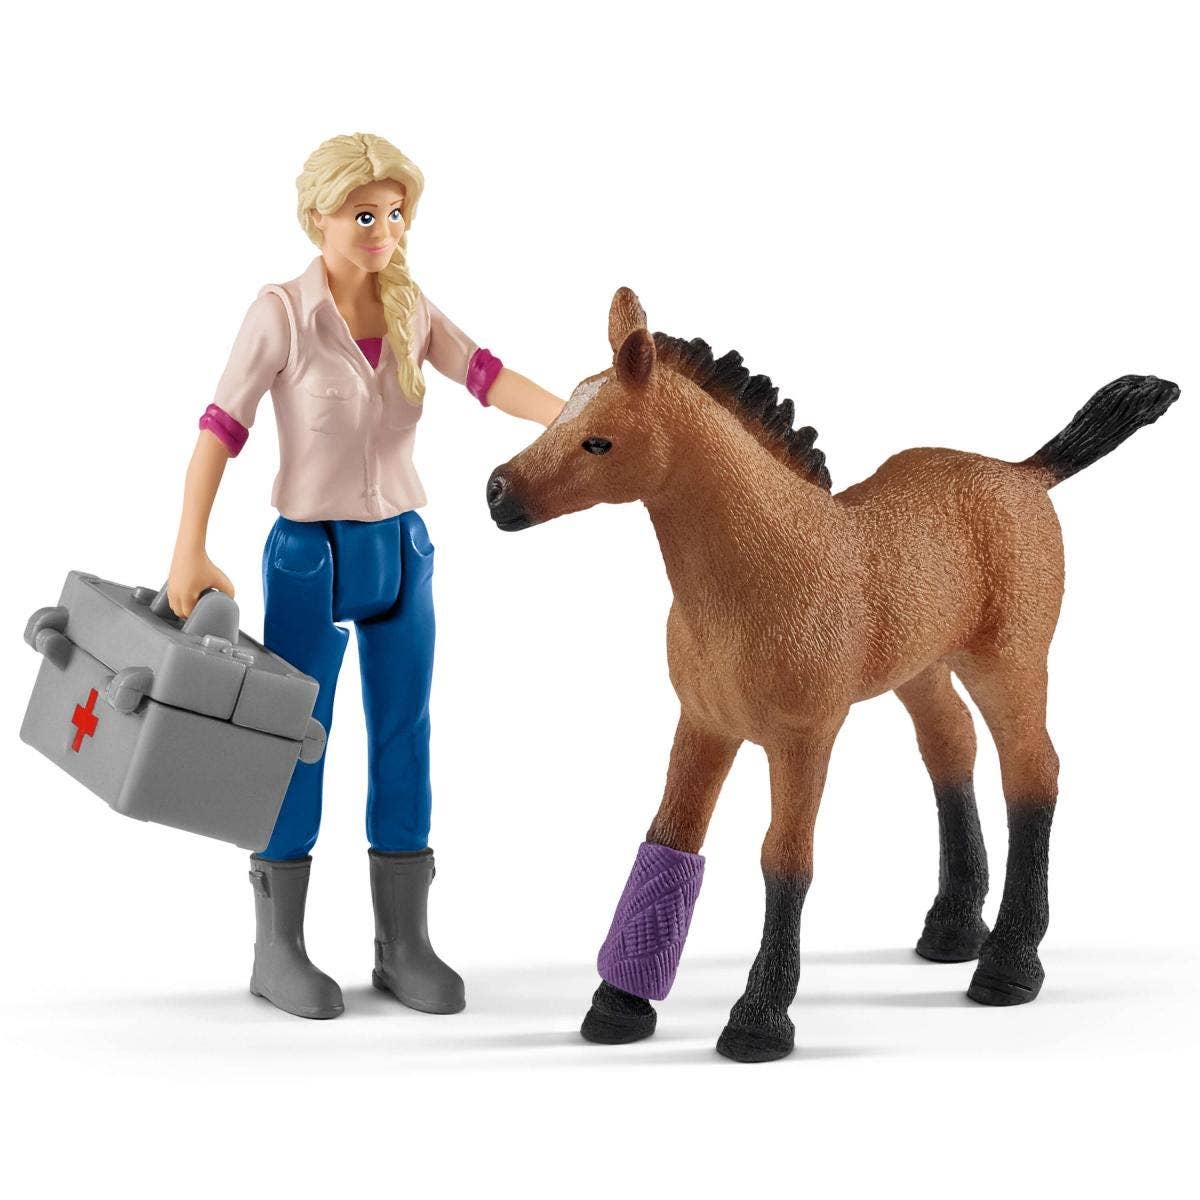 Vet Visiting Mare And Foal Farm Figurine Toys Play Set